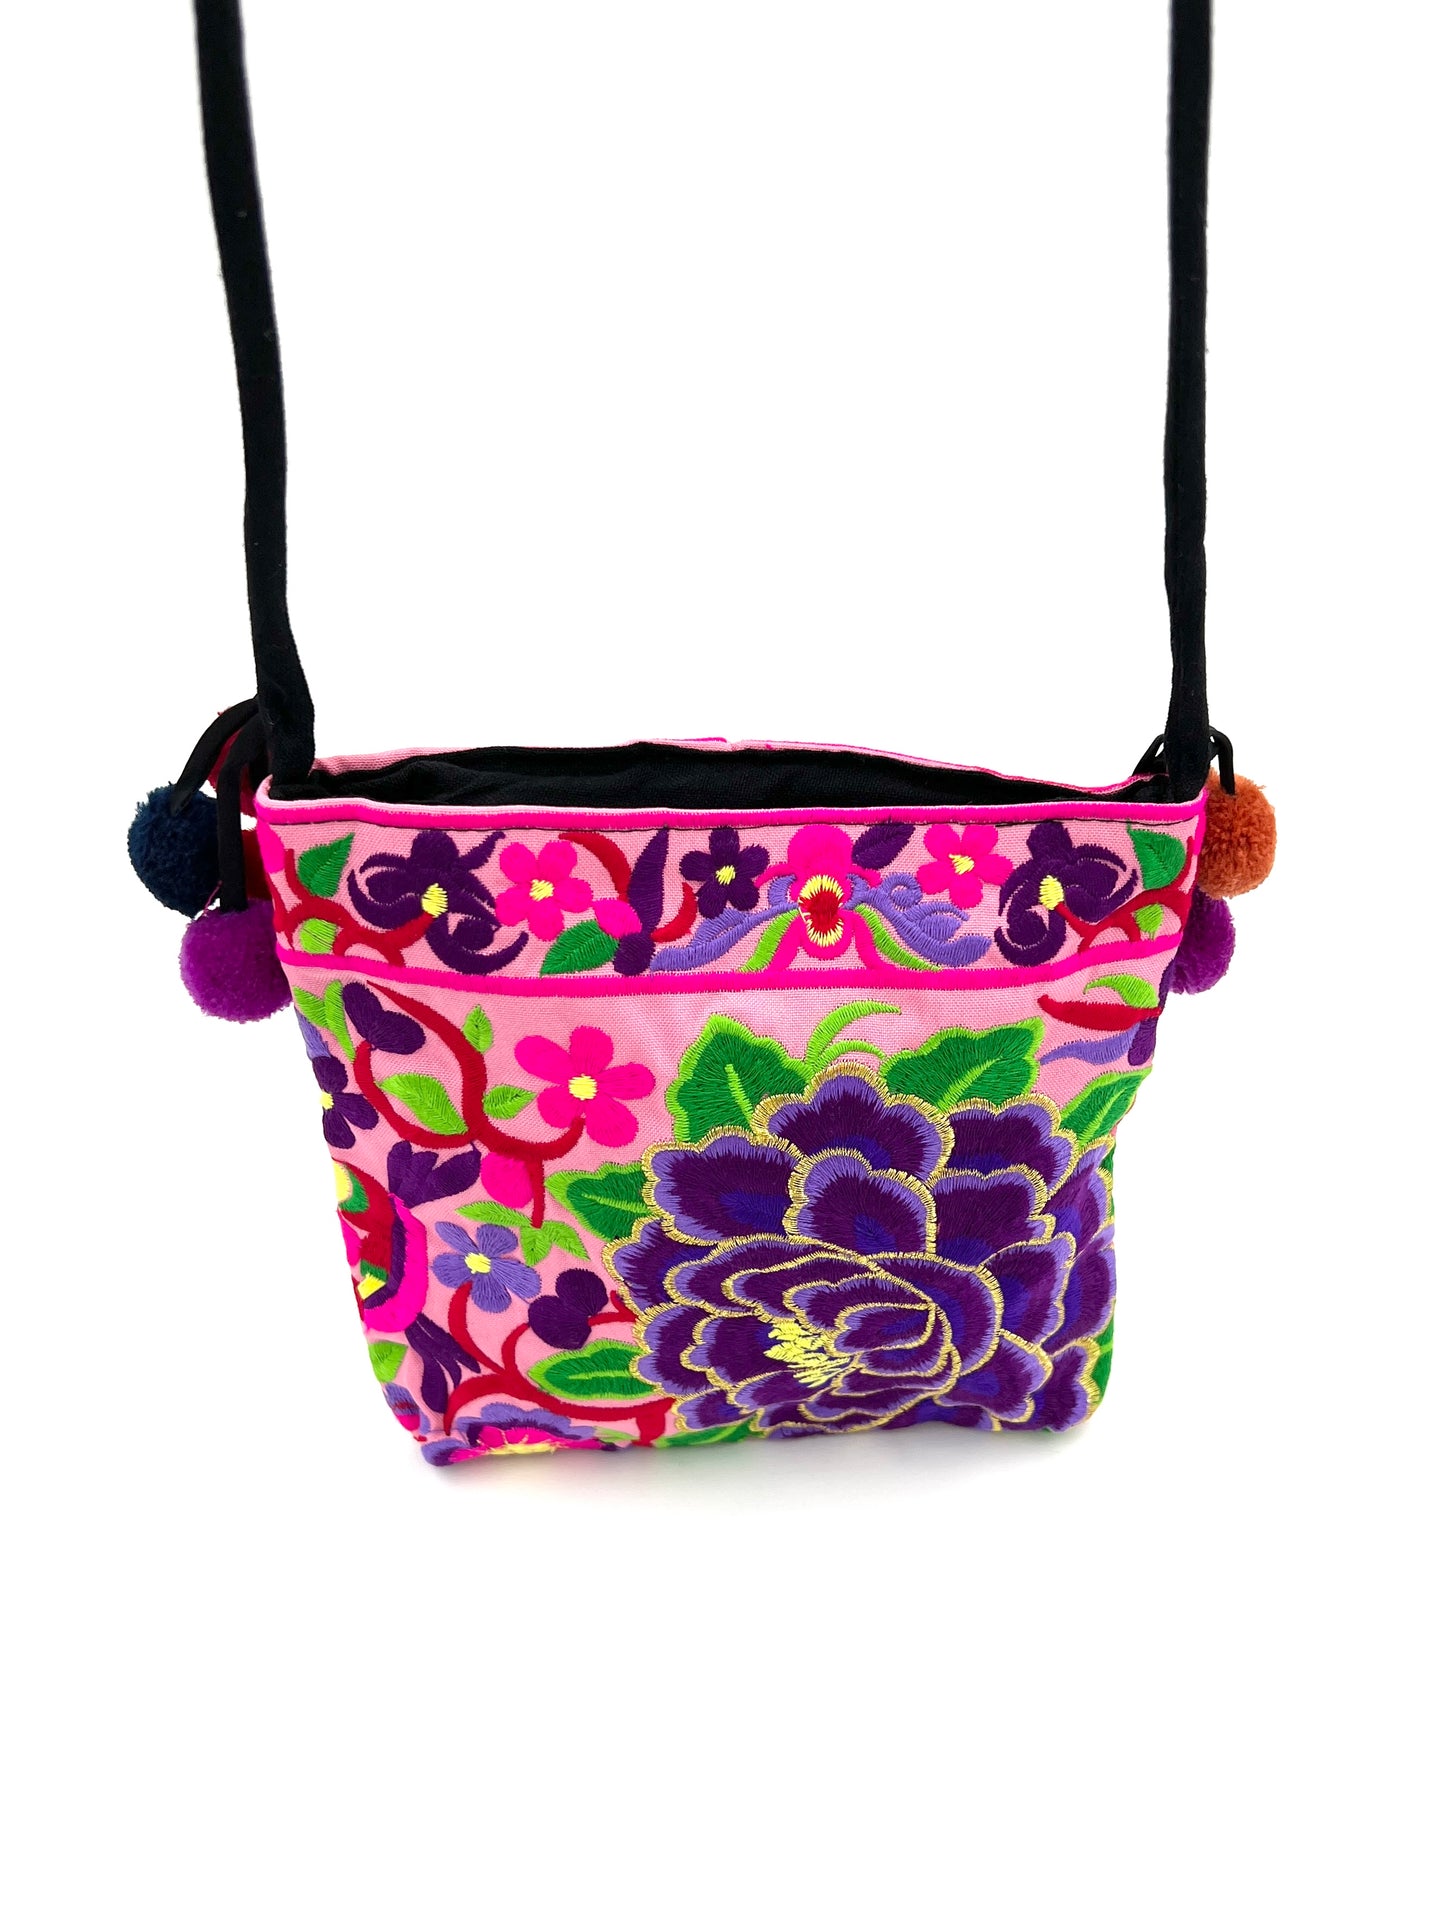 Embroidered Lotus Crossbody Bags w/ Pompoms